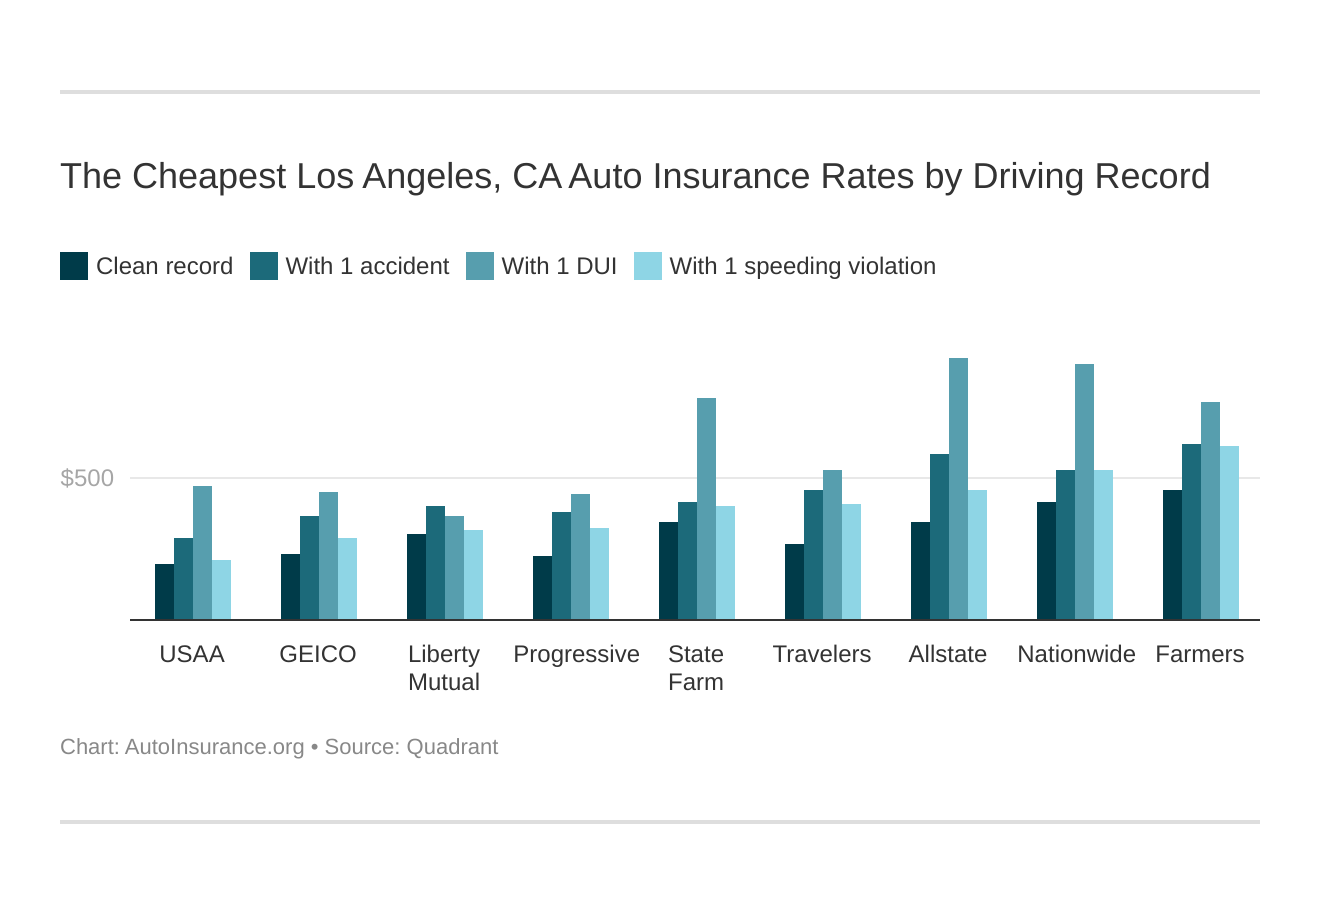 The Cheapest Los Angeles, CA Auto Insurance Rates by Driving Record